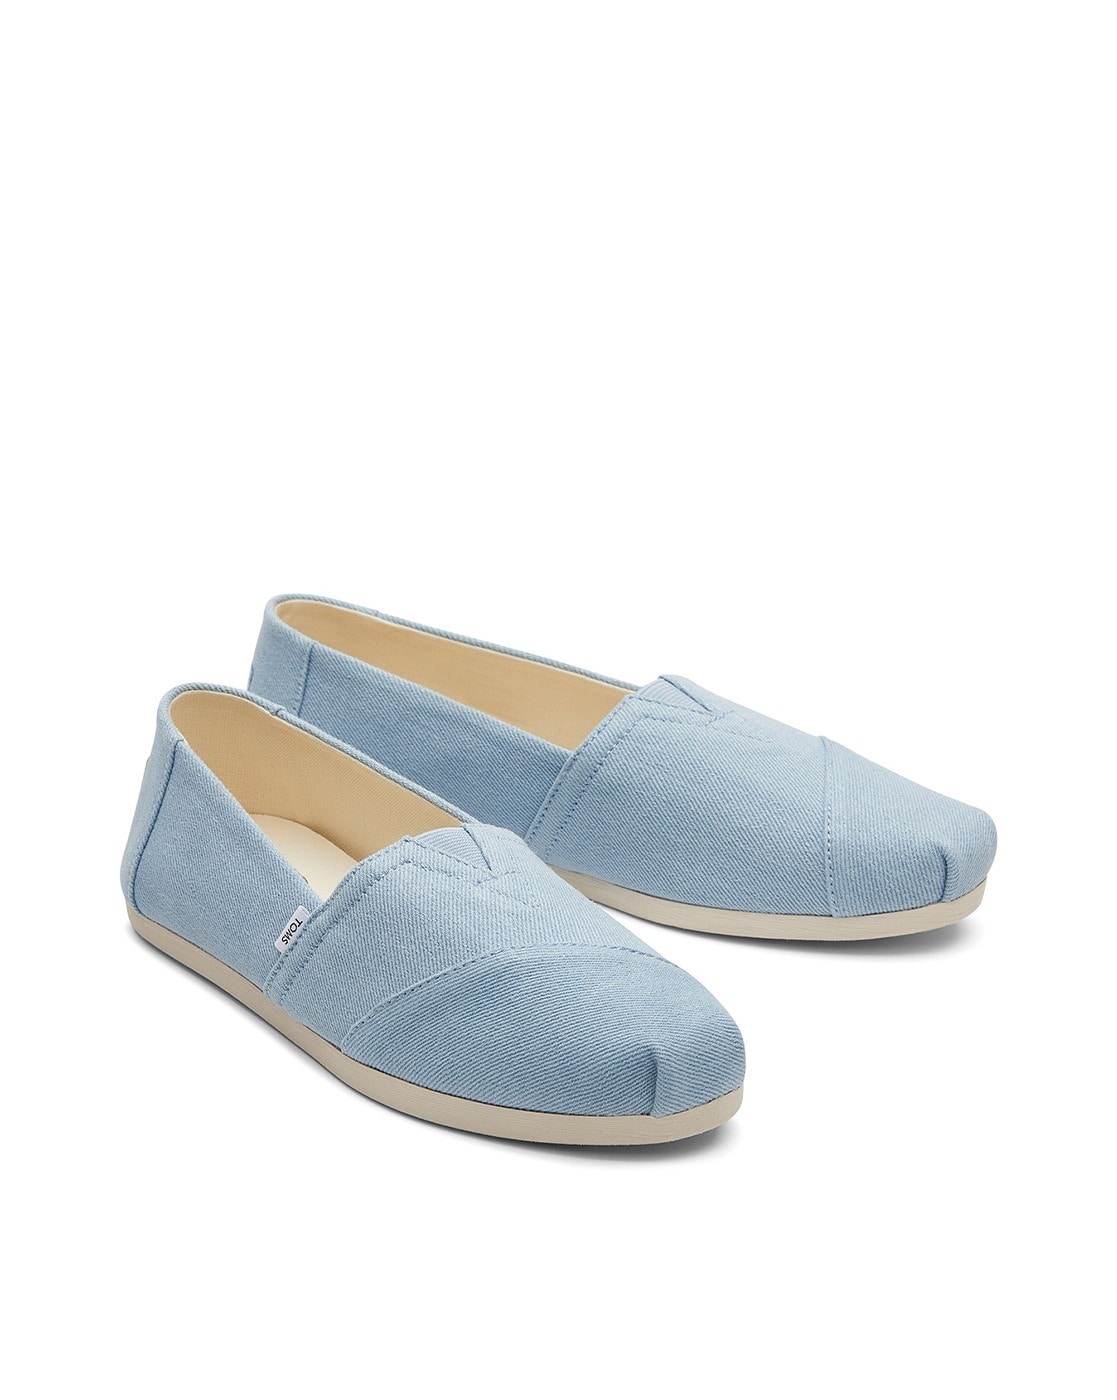 Explore more than 163 toms shoes latest